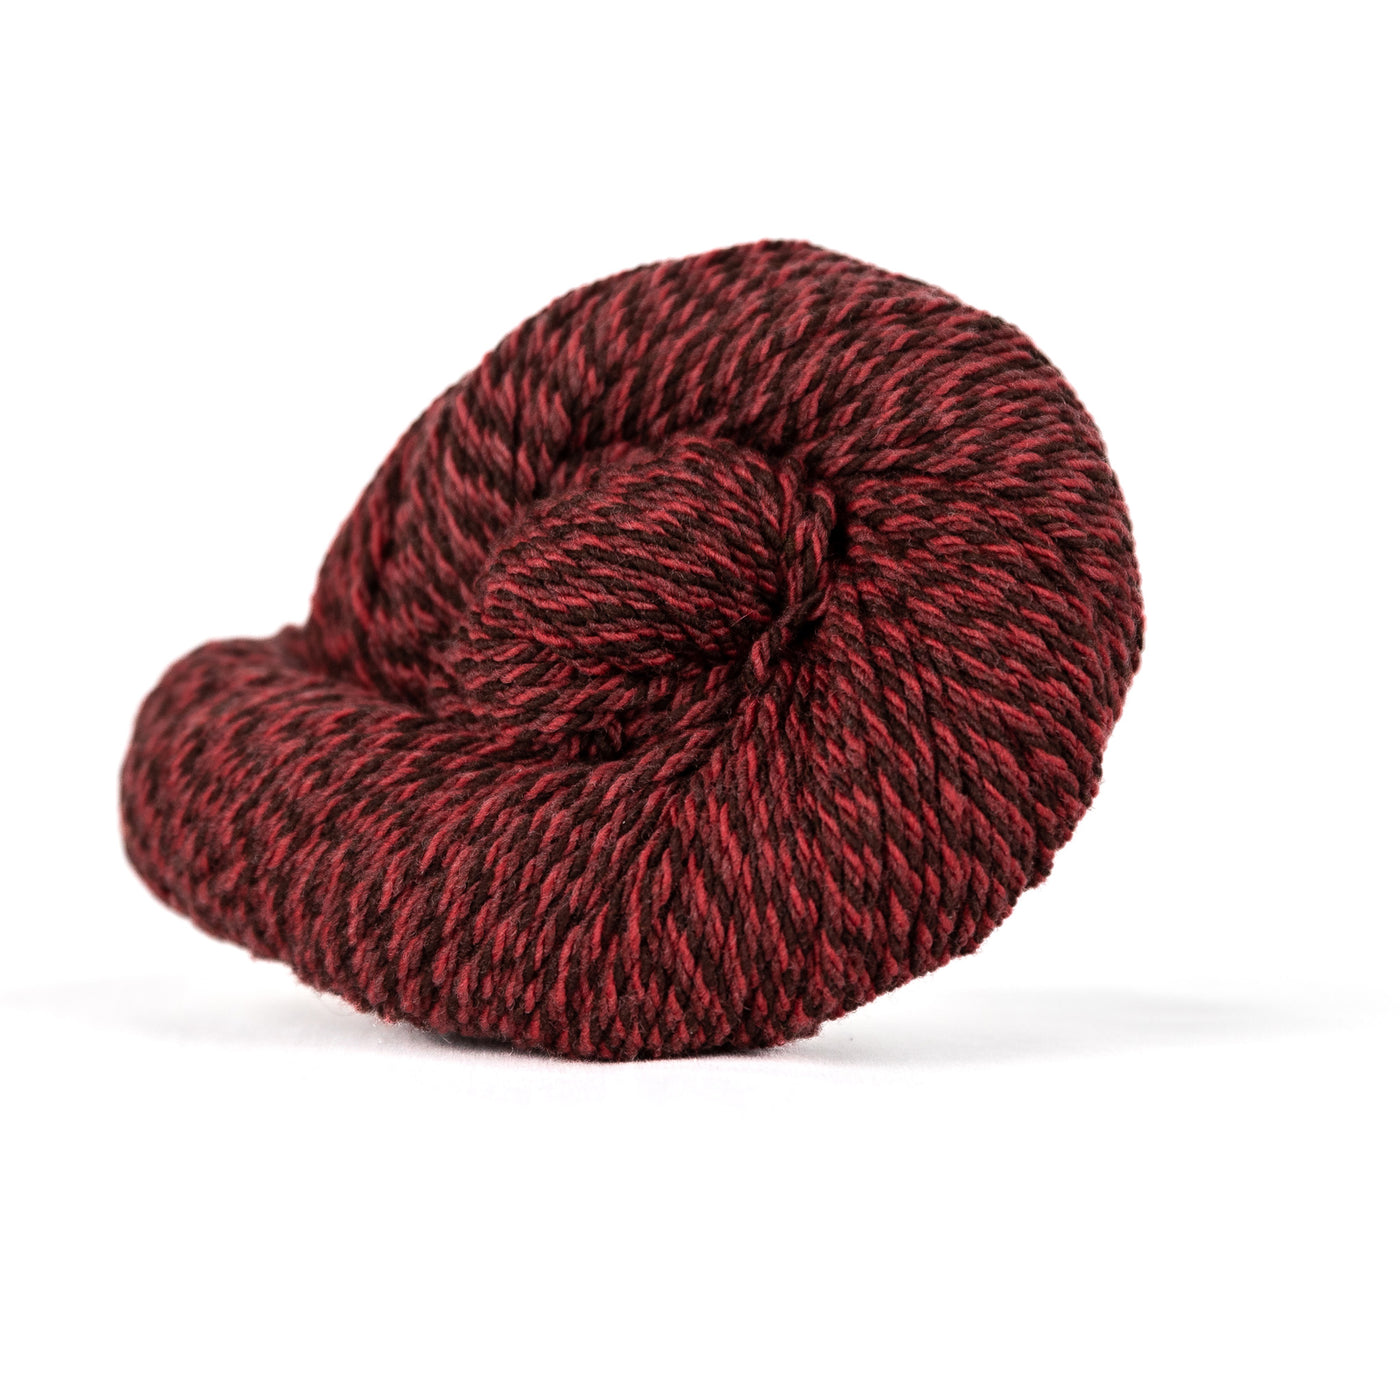 Cora 3ply Worsted Weight Yarn - Marled Russet